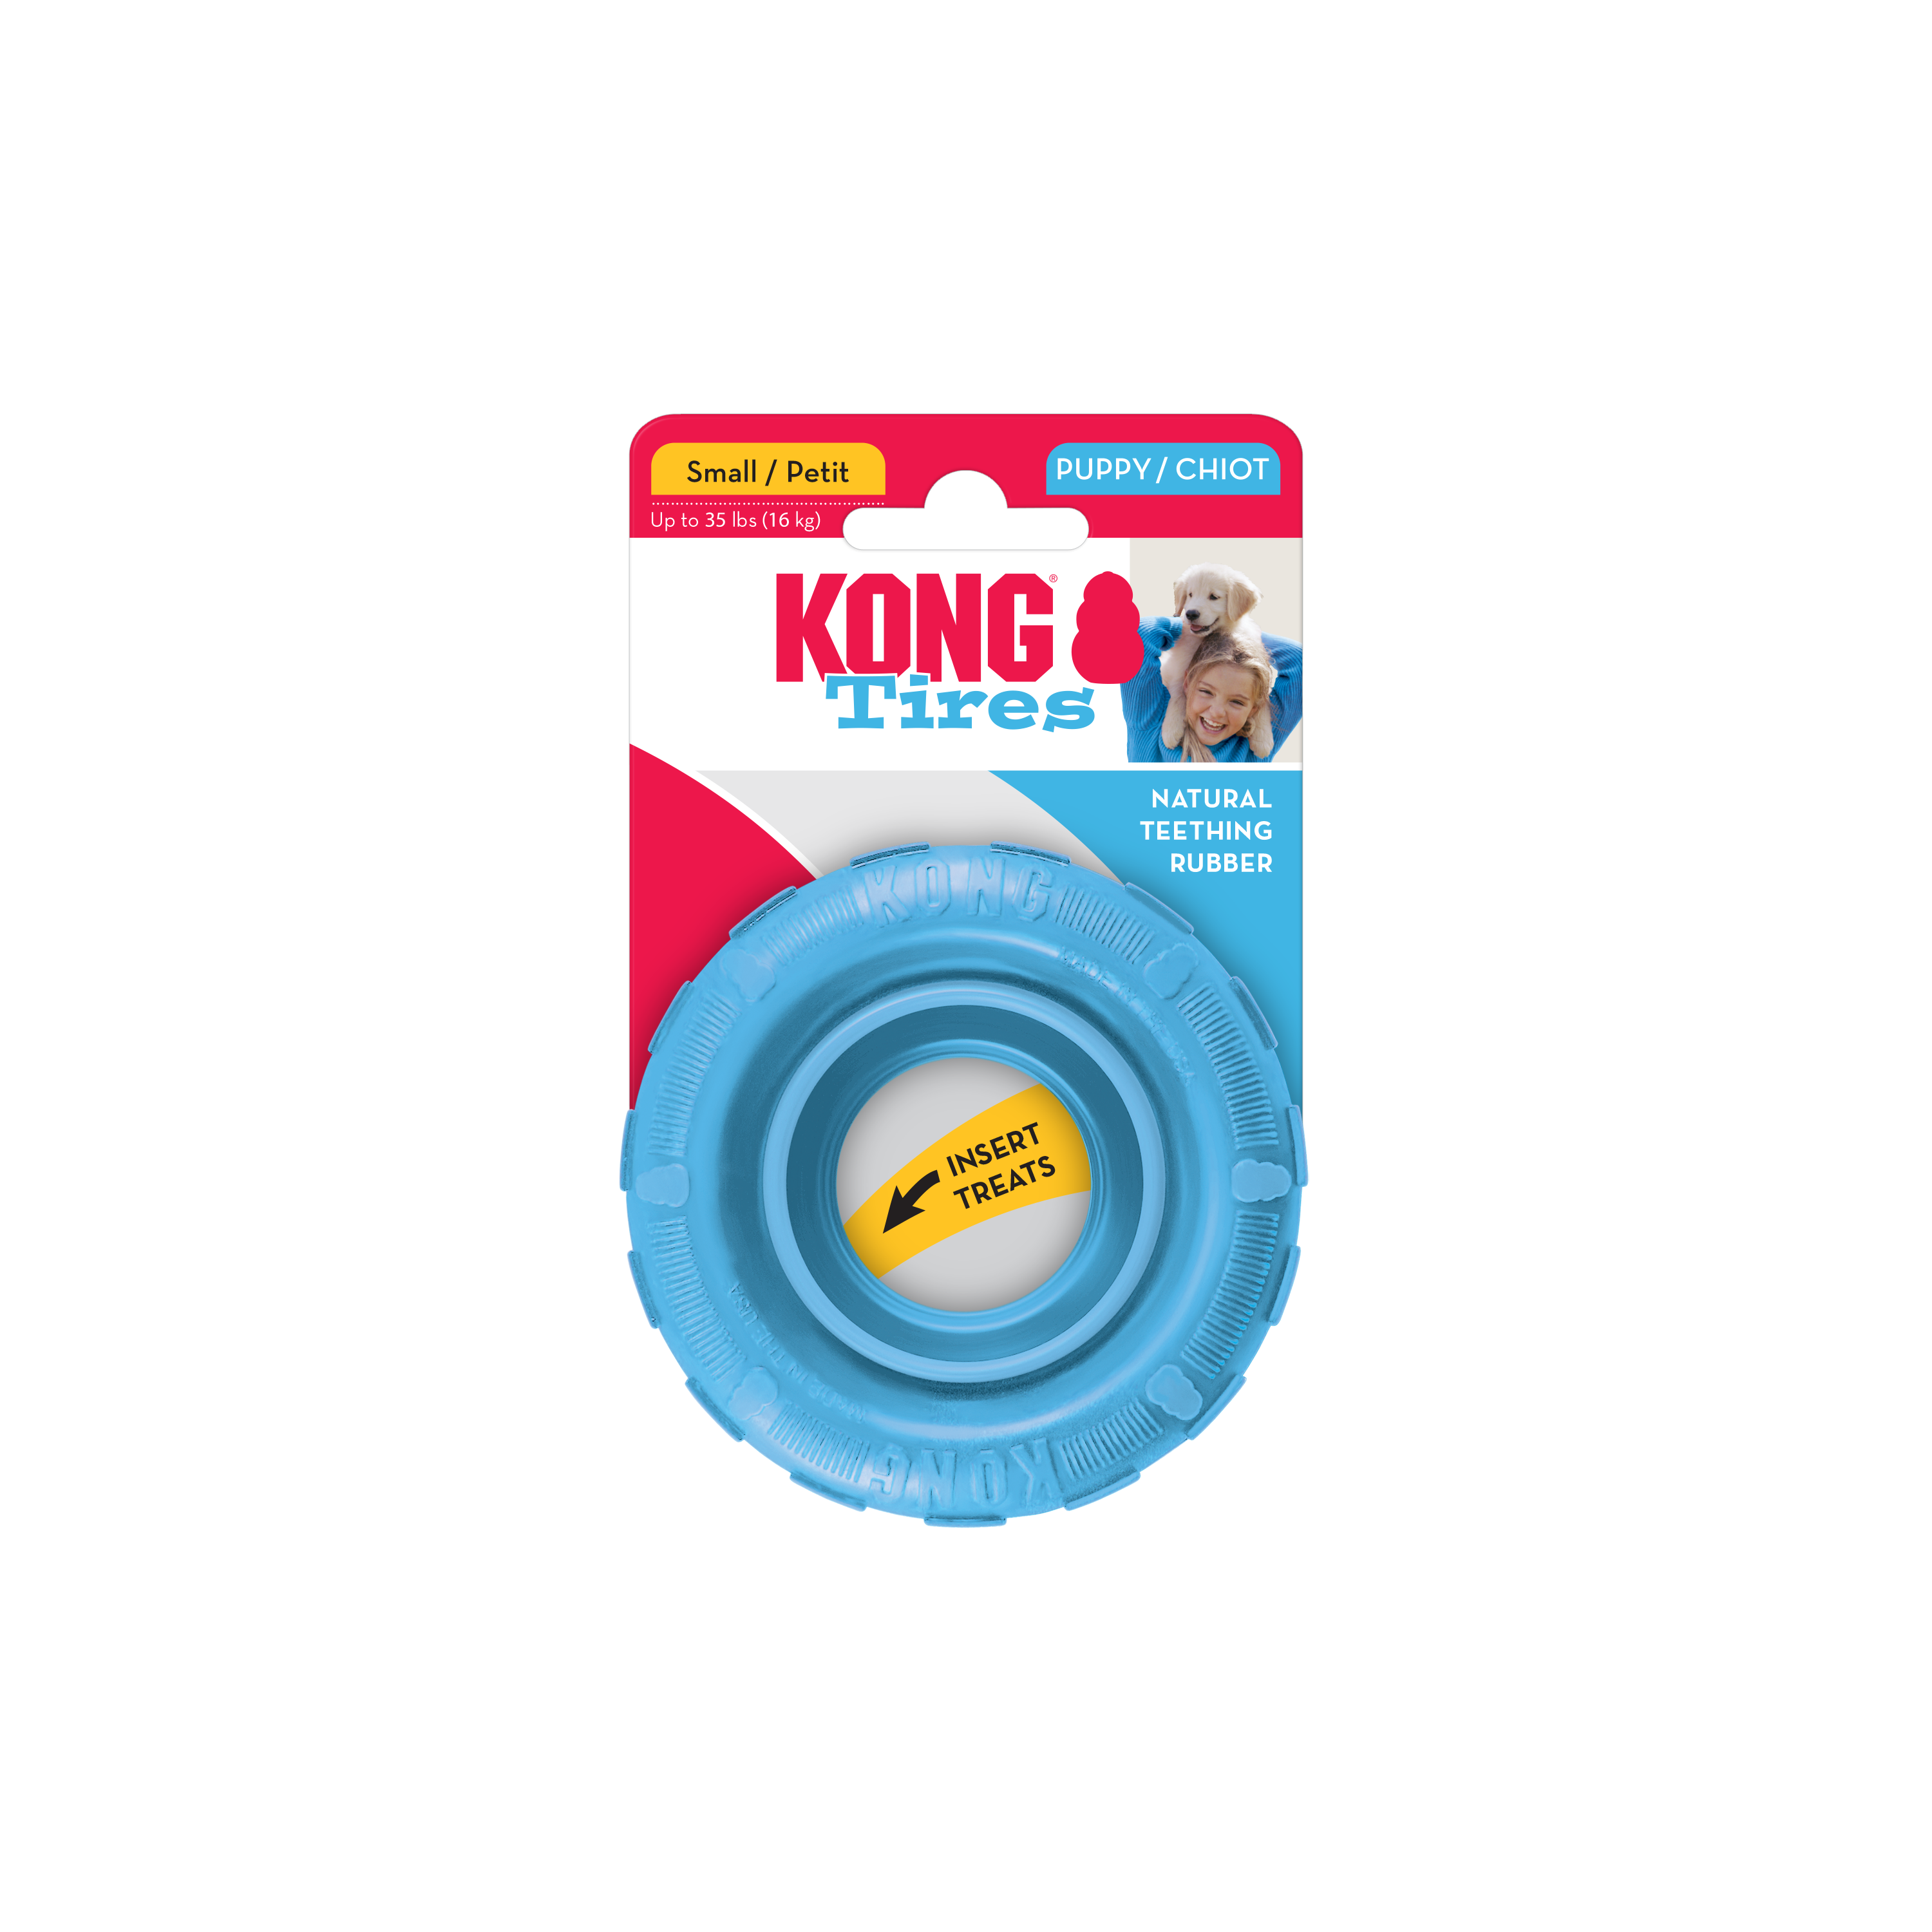 KONG Puppy Tires onpack product image